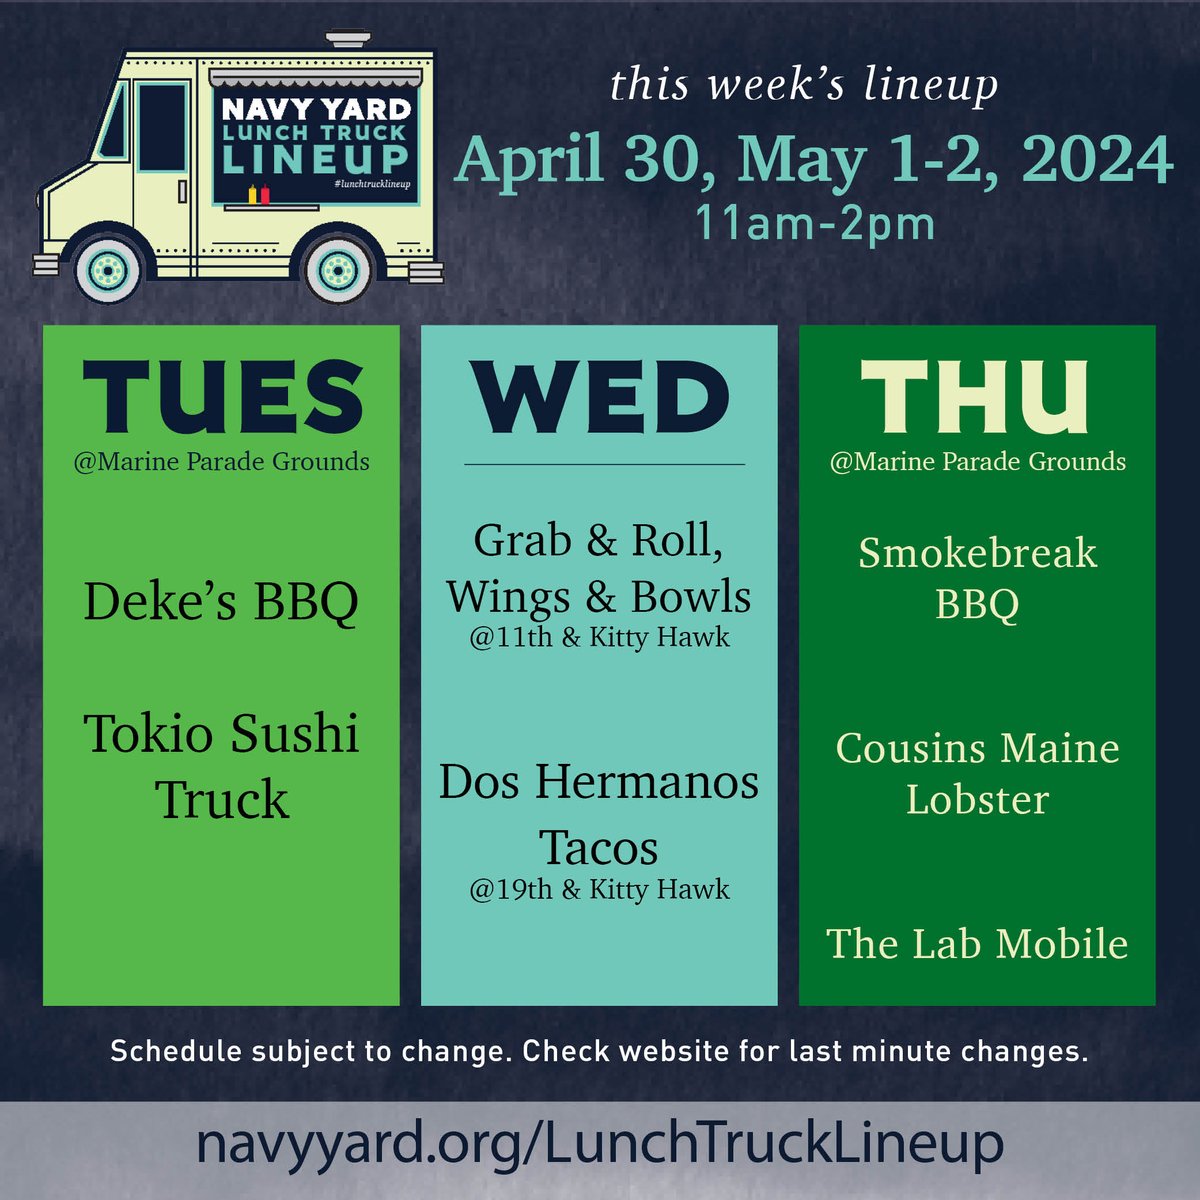 Who's ready for another great #lunchtrucklineup? We got some delicious options this week. Tues - @DekesBBQ and Tokio Sushi Truck Wed - Grab & Roll, Wings & Bowls and @2HermanosTacos Thurs - @Terranc85250227 (Smoke Break BBQ) and @cousinsmainelob #navyyardeats #discovertheyard